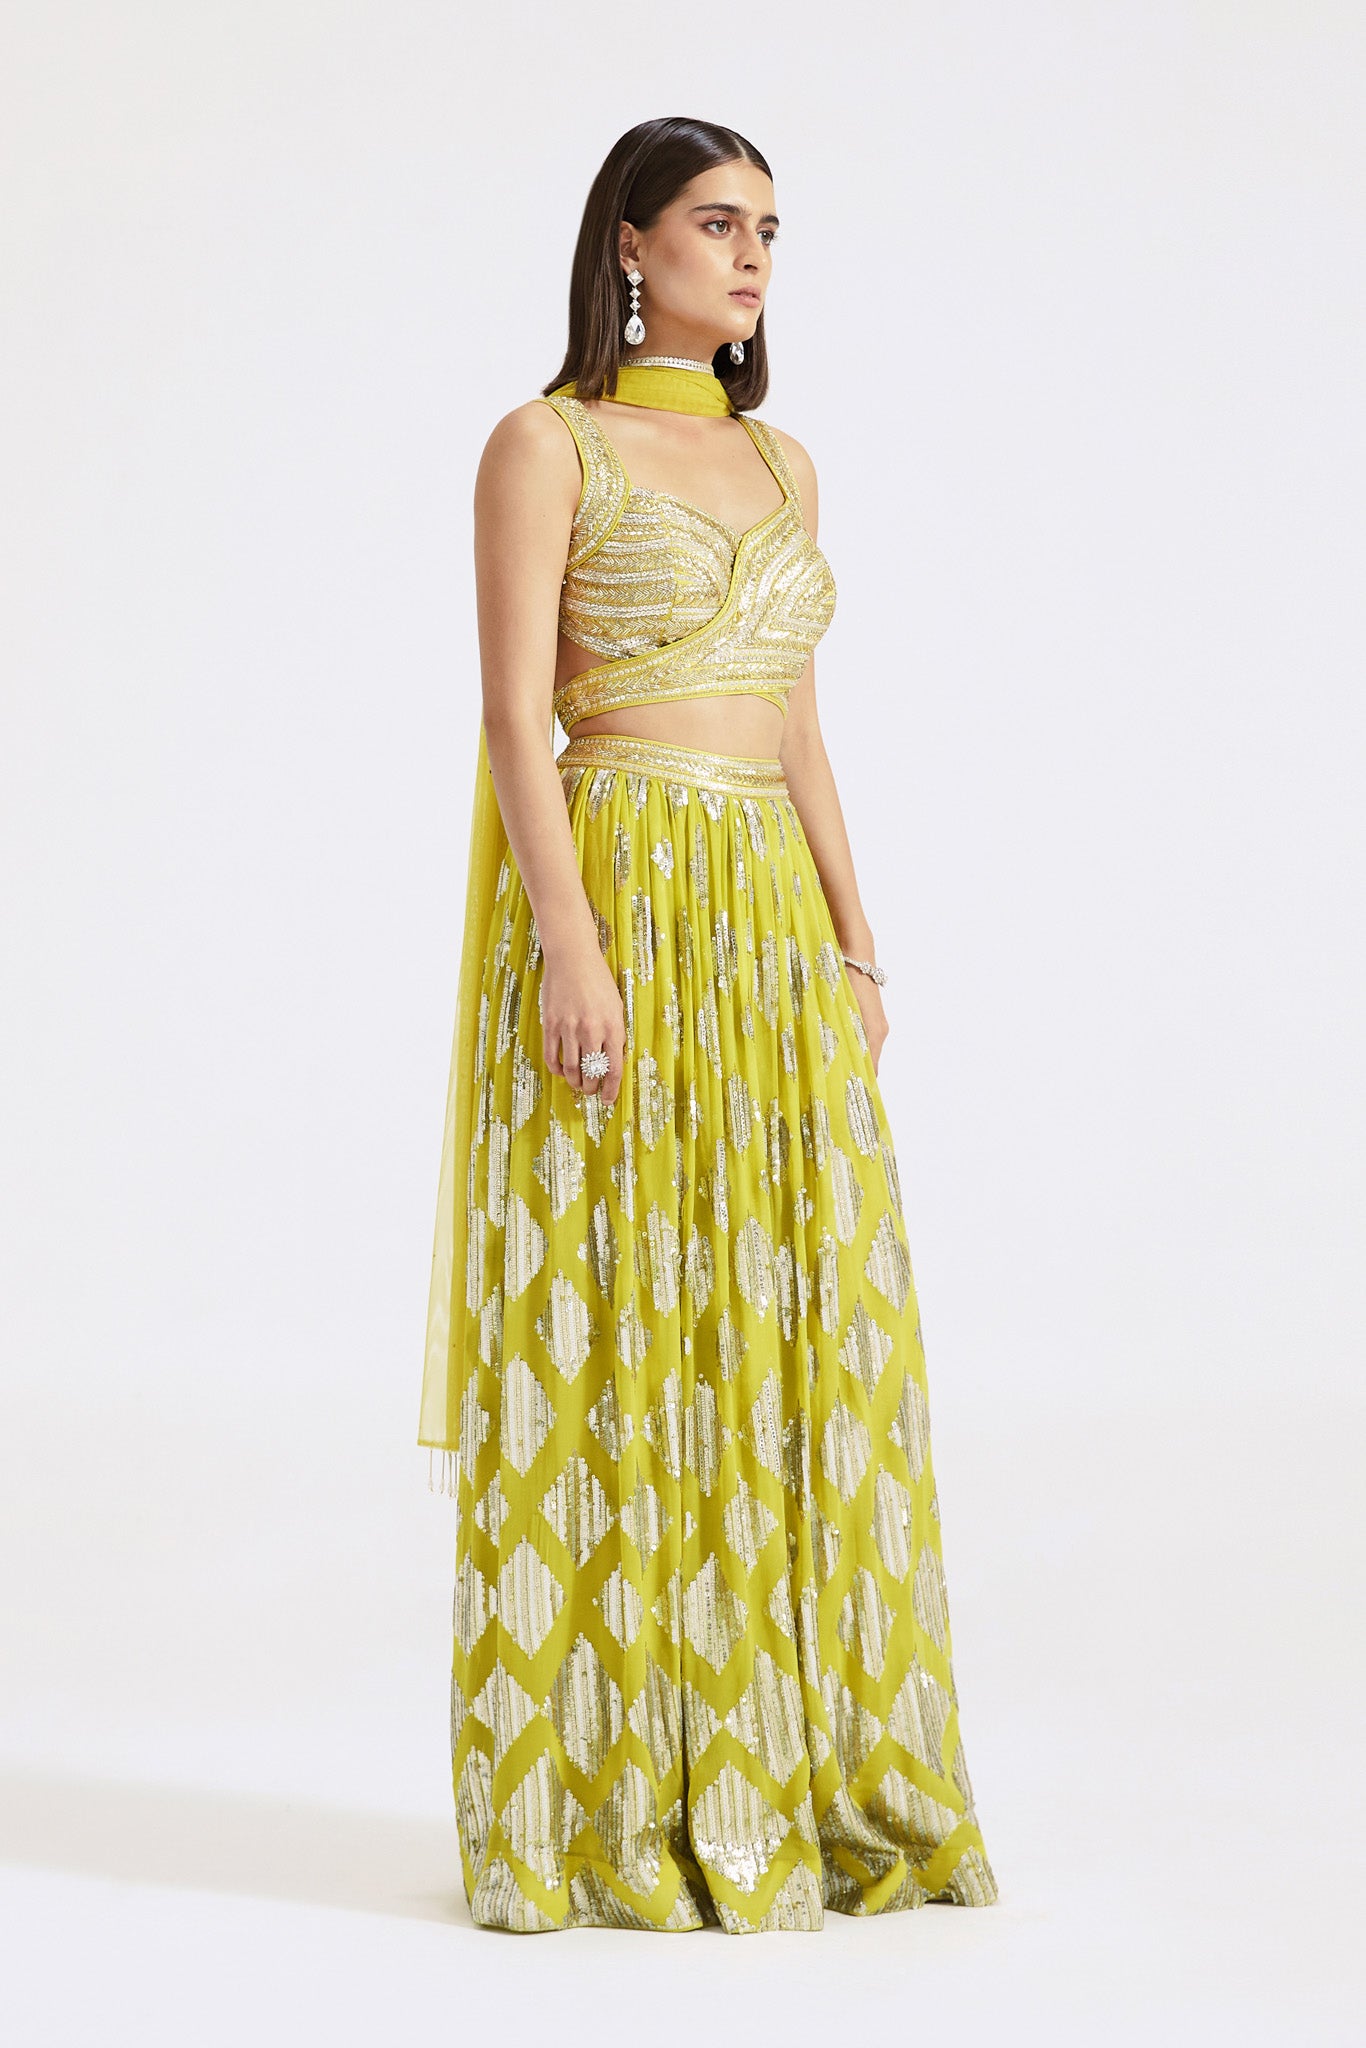 Shop beautiful lime green cutdana and mirror work skirt set online in USA. Shop the best and latest designs in embroidered sarees, designer sarees, Anarkali suit, lehengas, sharara suits for weddings and special occasions from Pure Elegance Indian fashion store in USA.-side